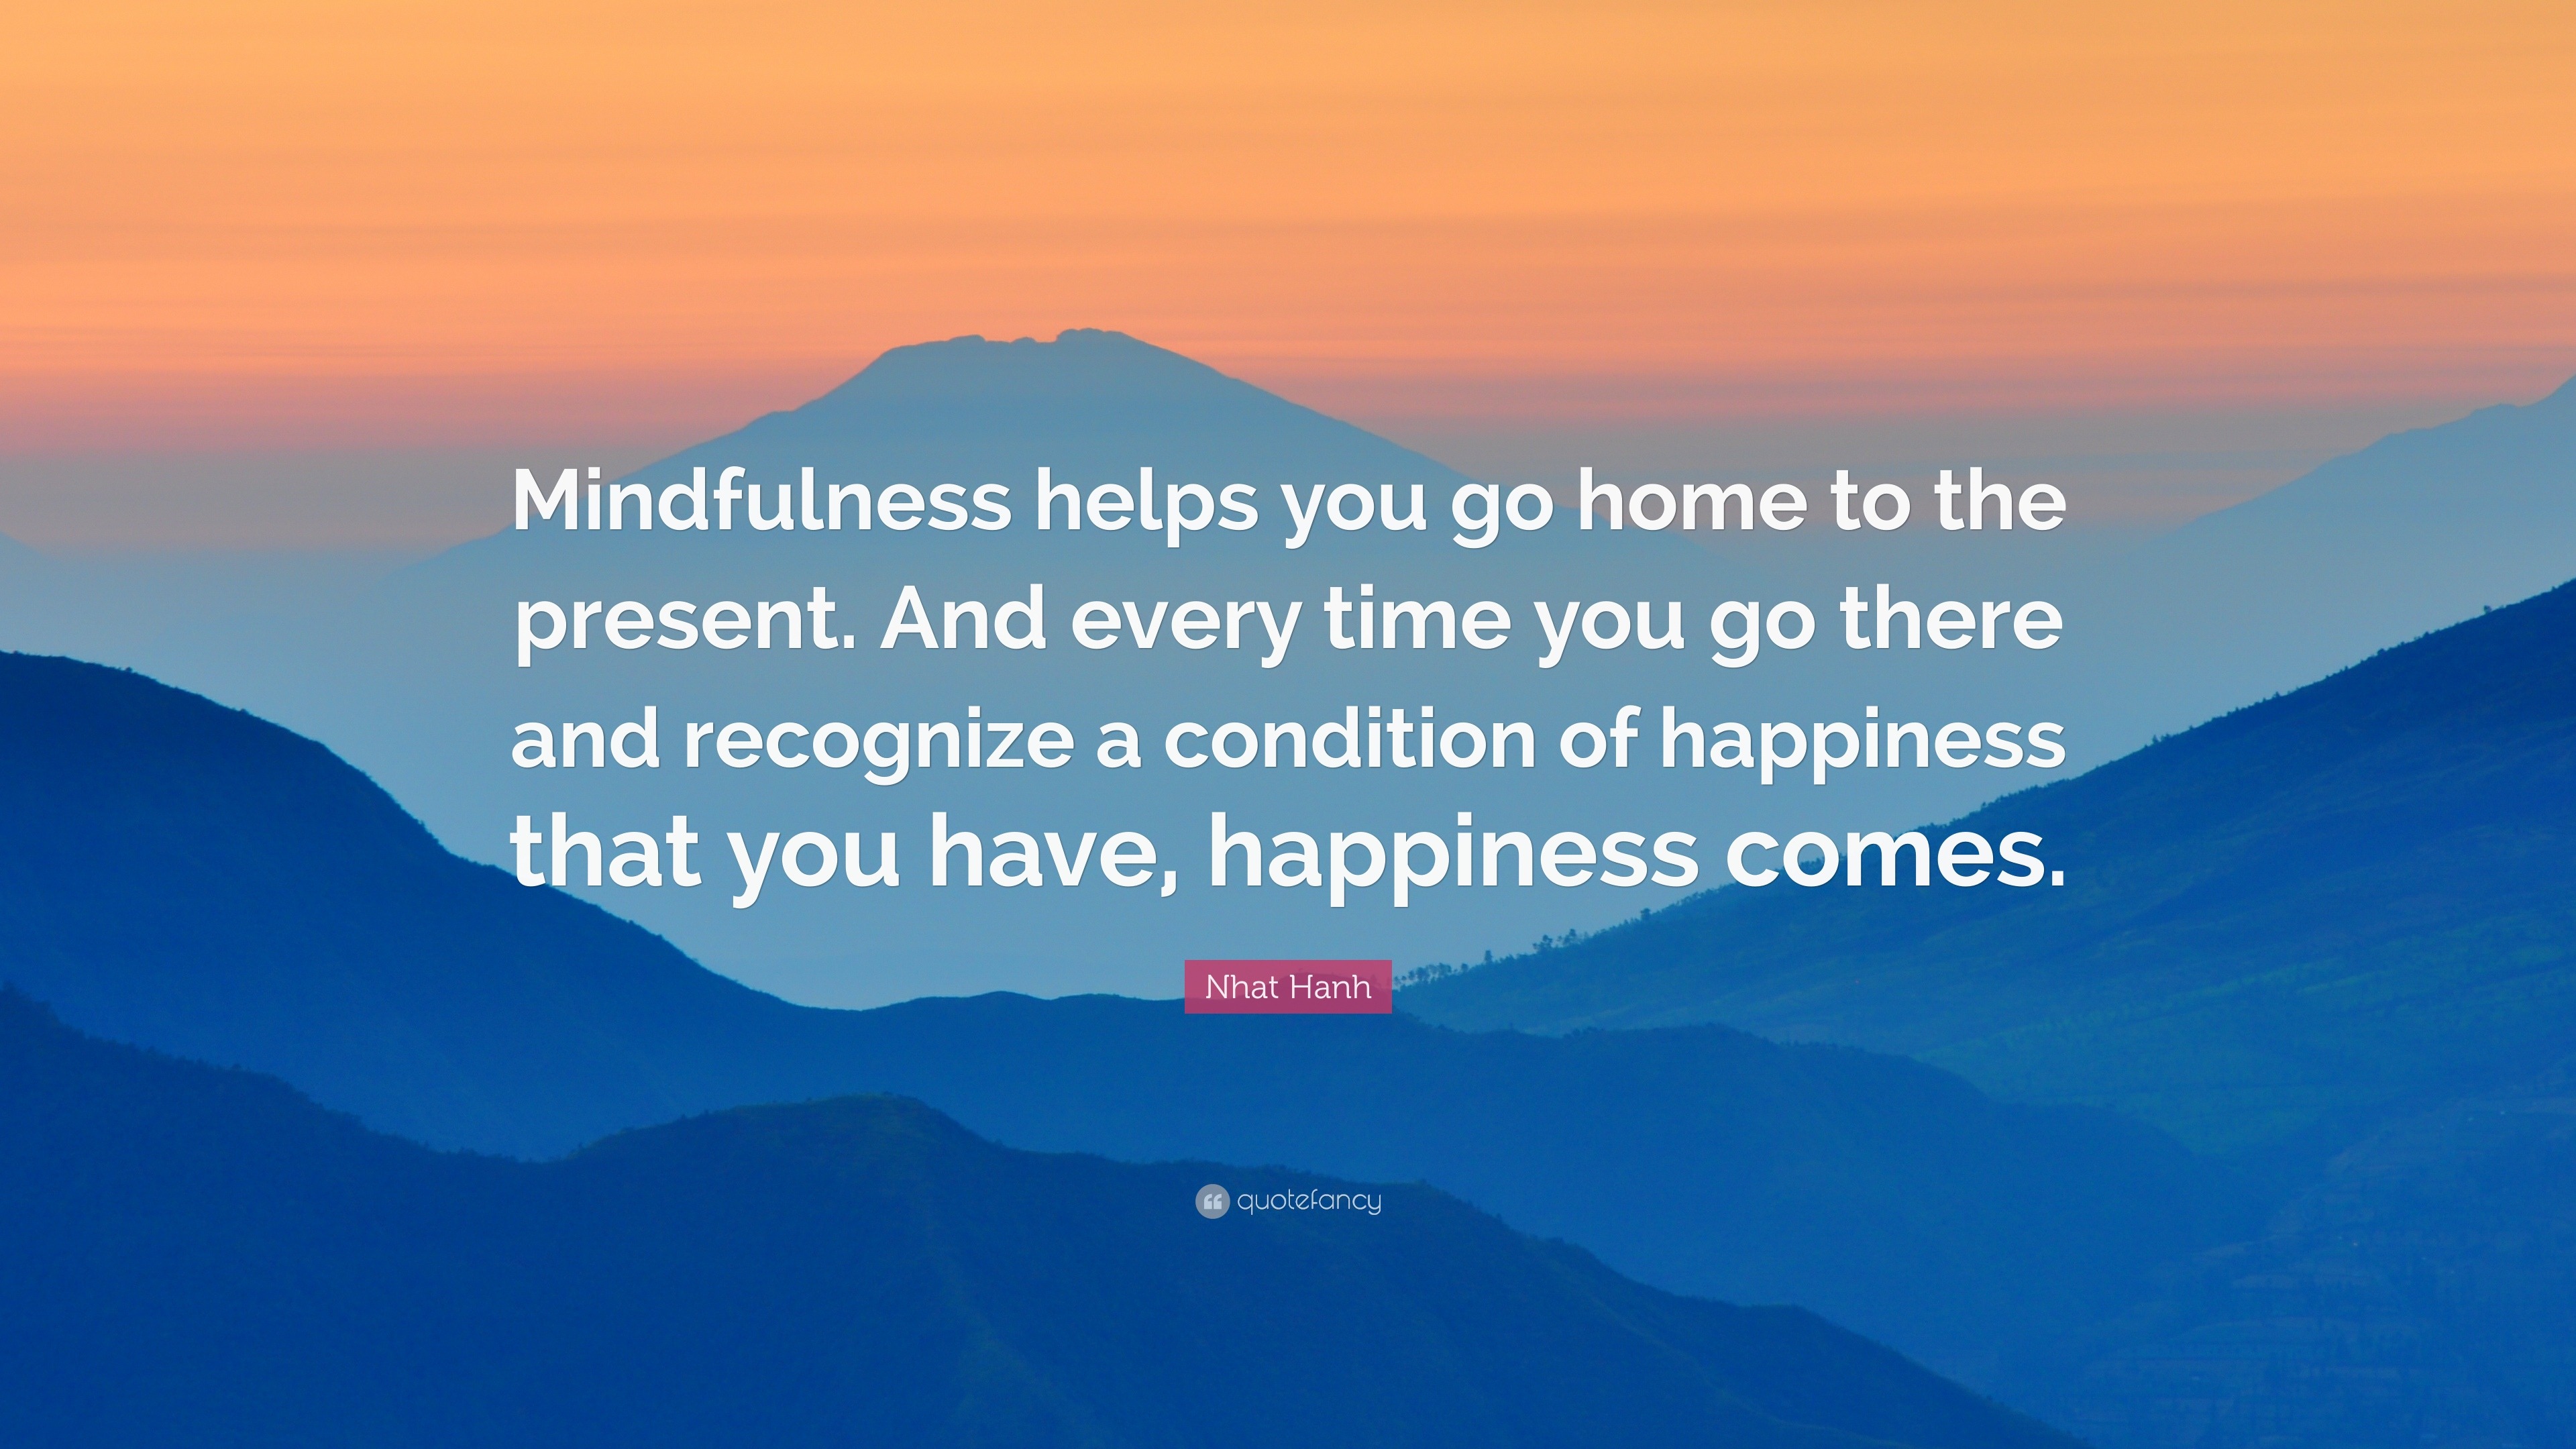 Nhat Hanh Quote: “Mindfulness helps you go home to the present. And ...